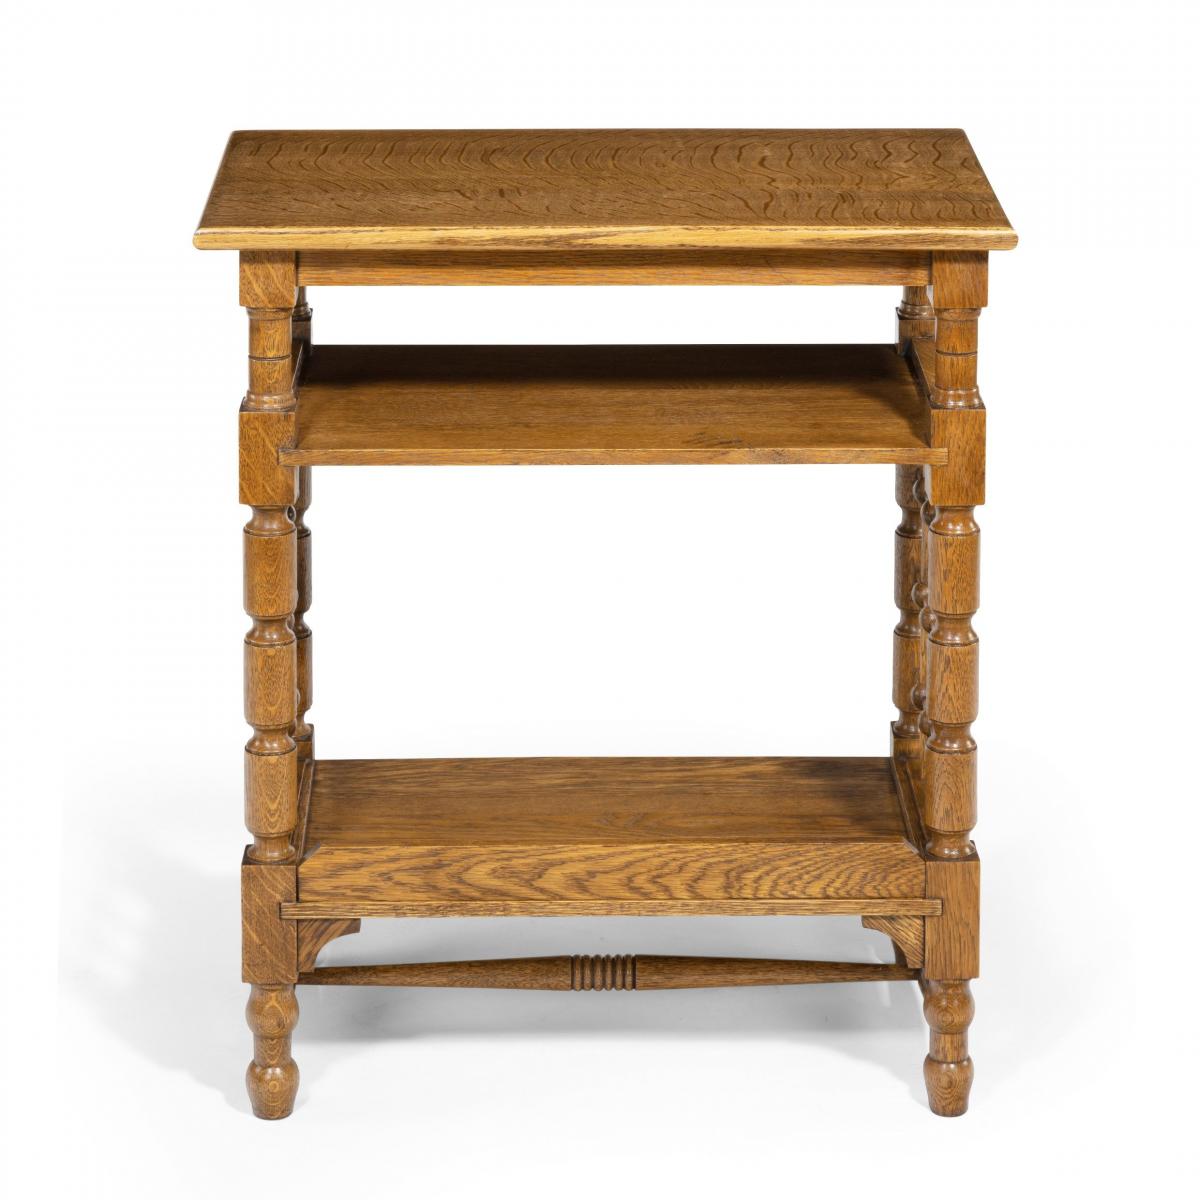 A Matched Pair of Oak Side Tables Attributed to Liberty’s